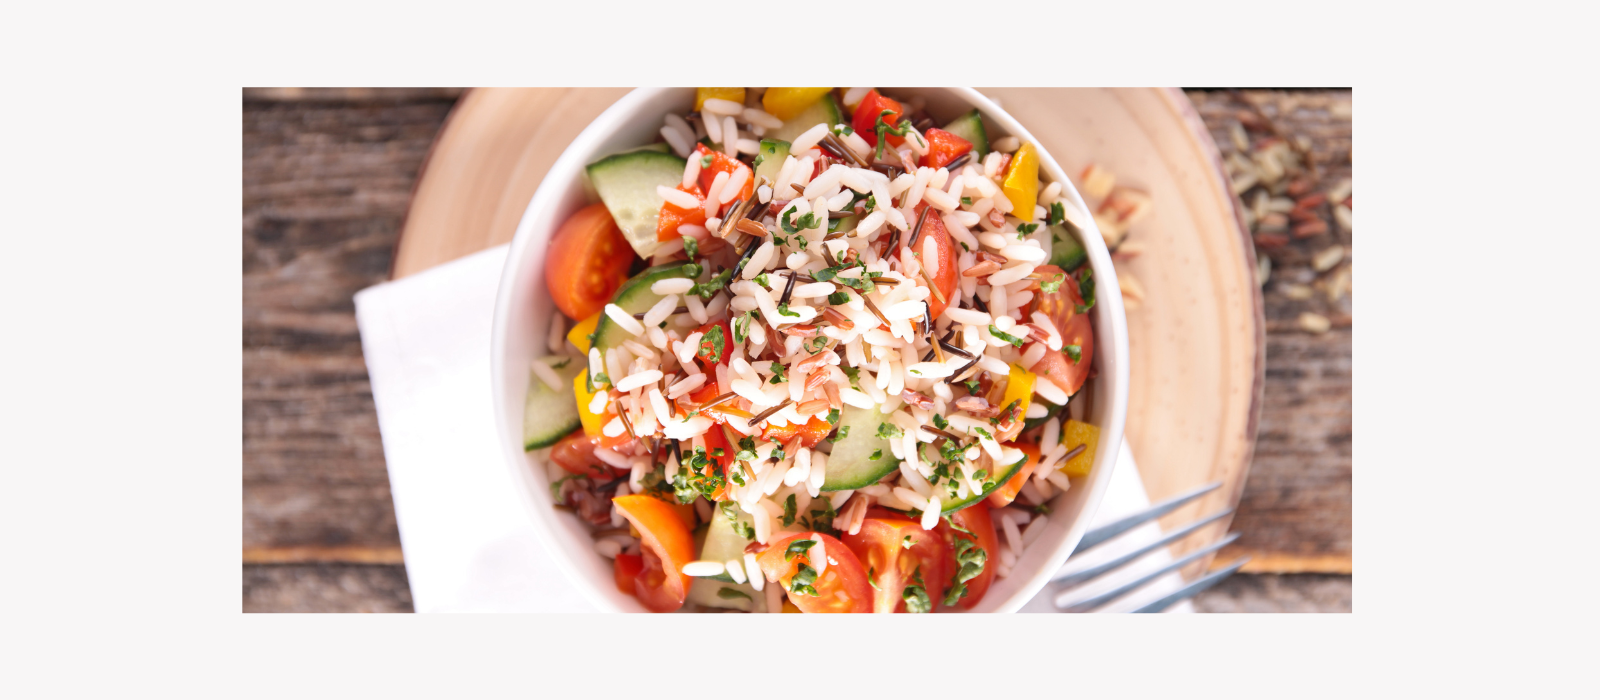 Wild rice, brown rice, tomatoes and cucumbers make a light side dish on the DASH eating plan. For people with high blood pressure or hypertension, obesity or prediabetes.